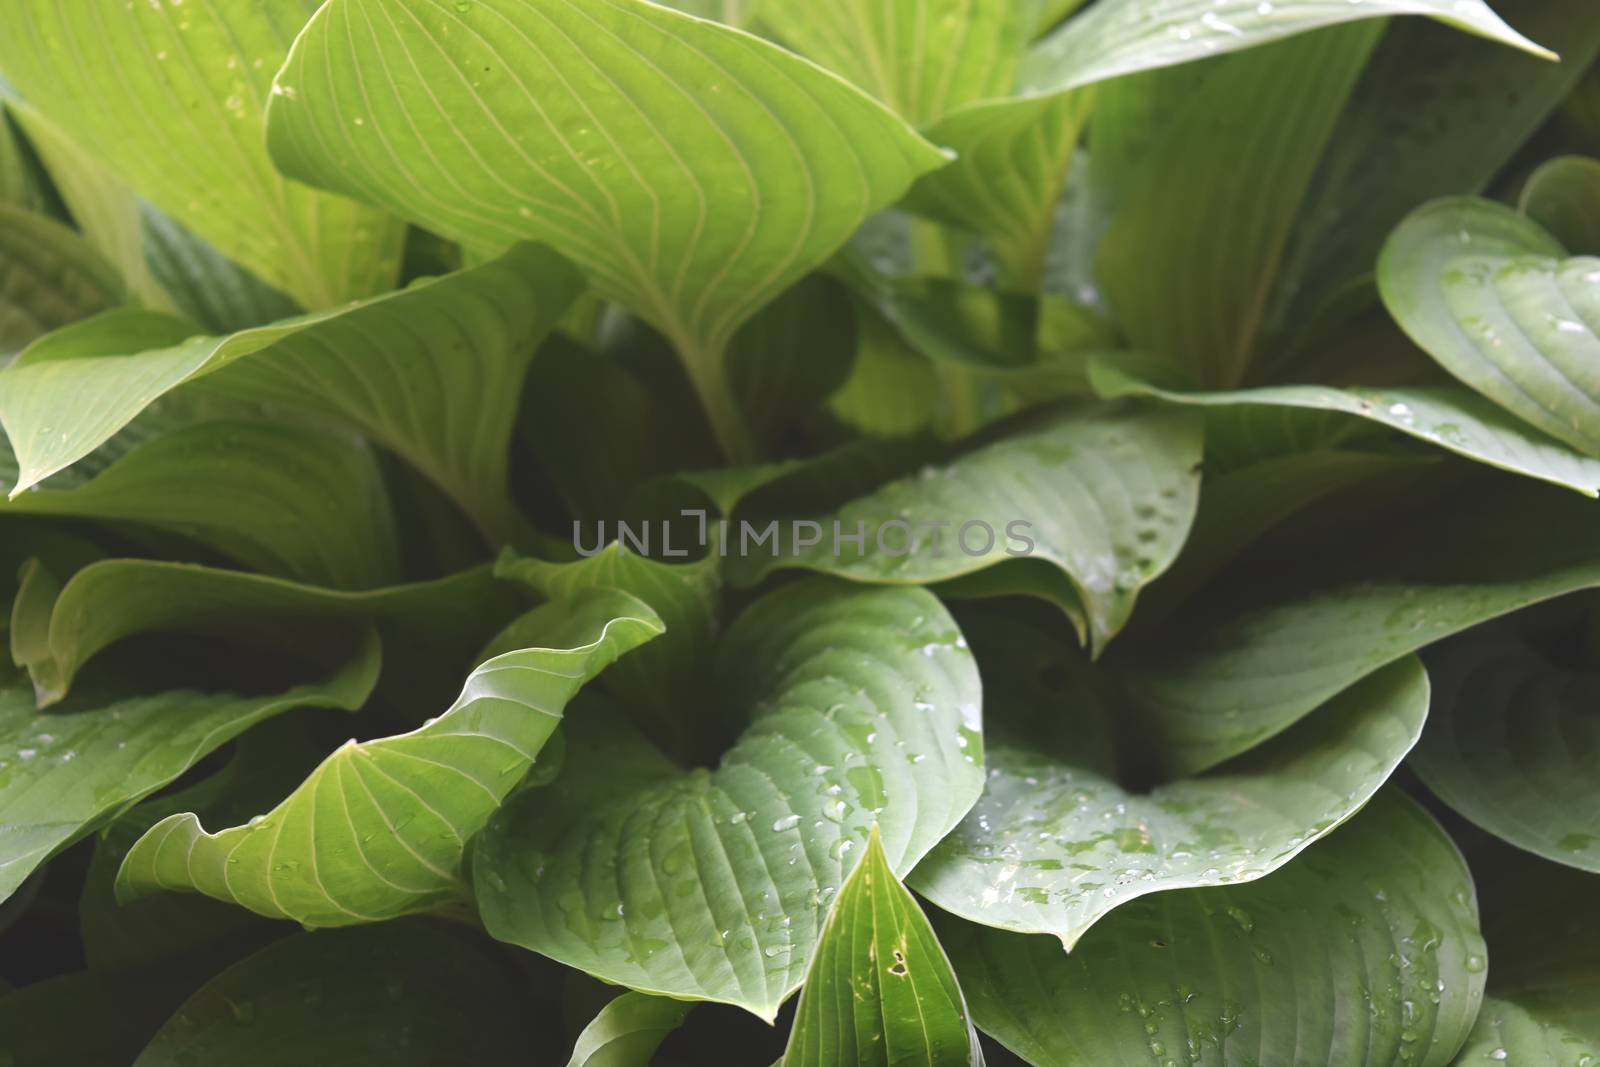 Green Plant Background For Your Design And Needs